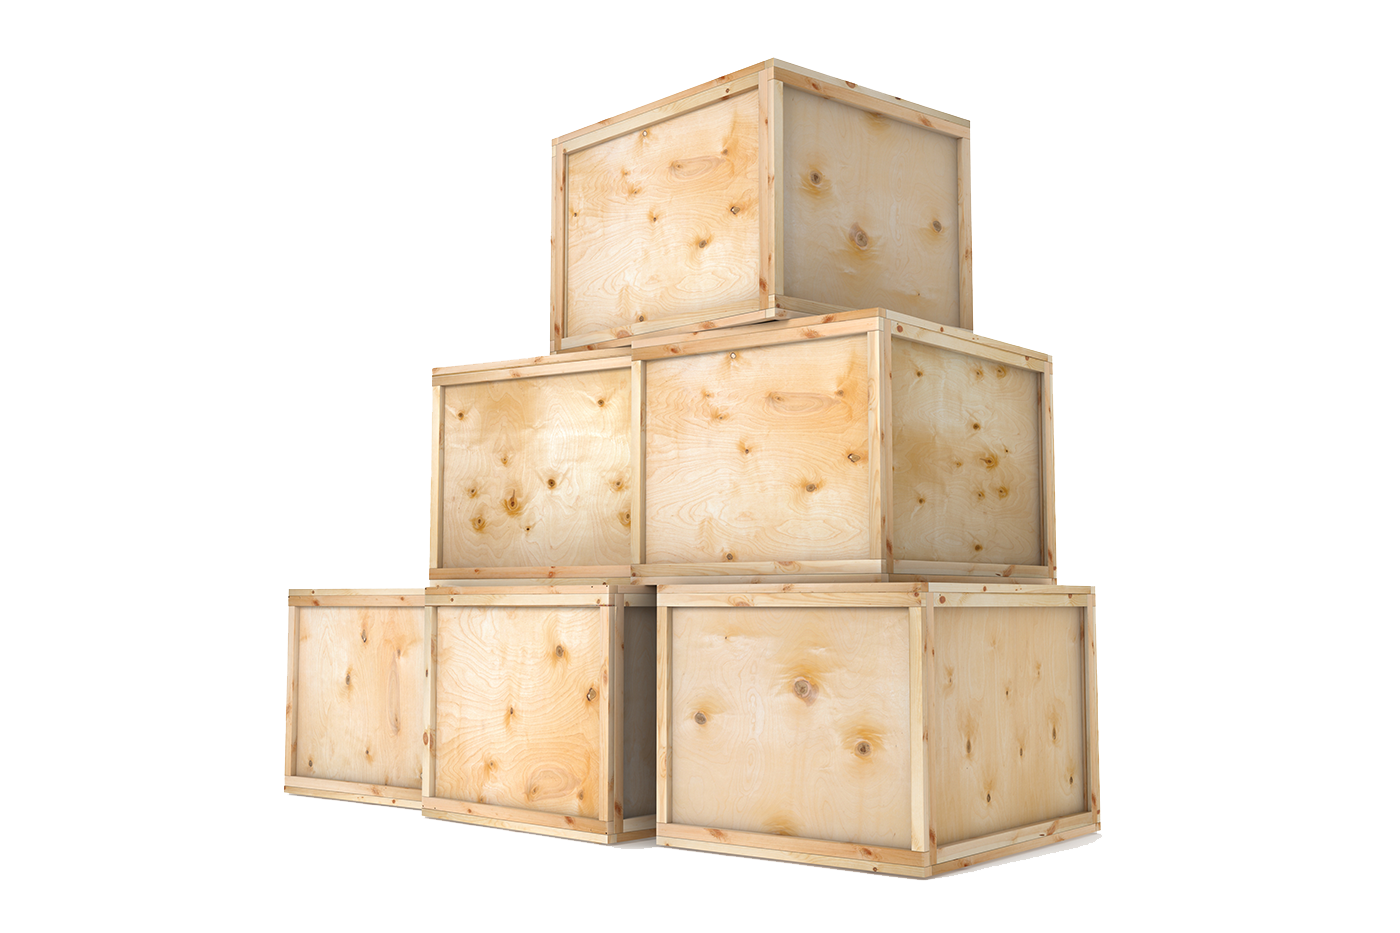 Stacked wood crates